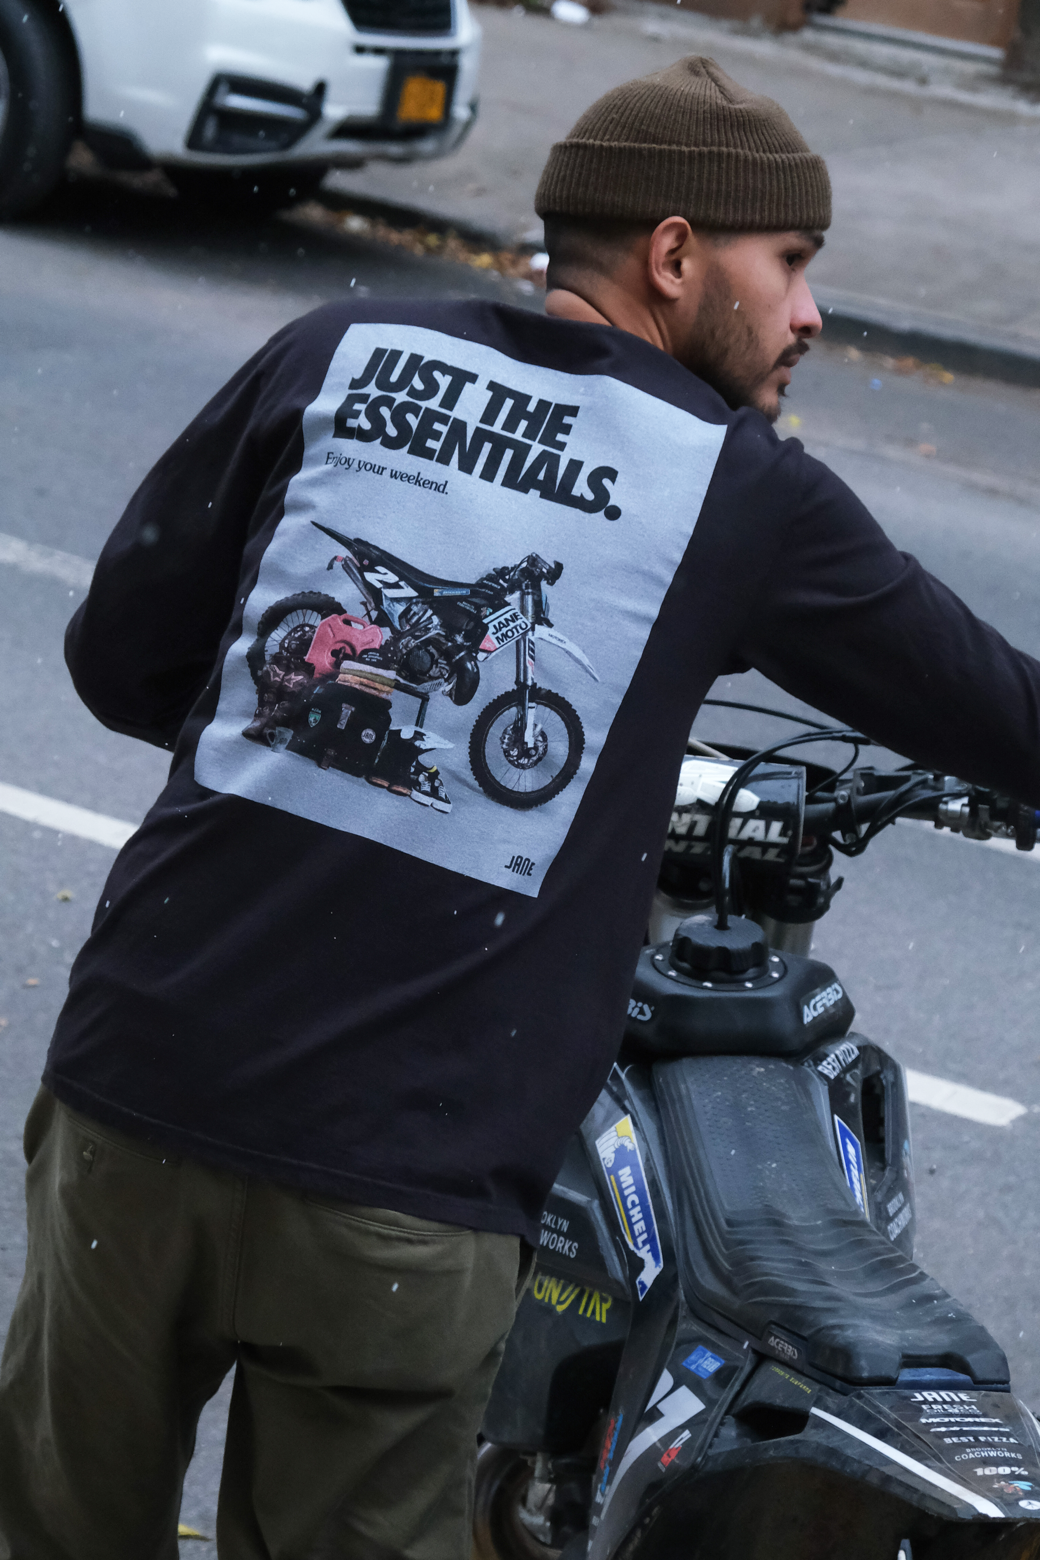 JUST THE ESSENTIALS LONG SLEEVE T-SHIRT